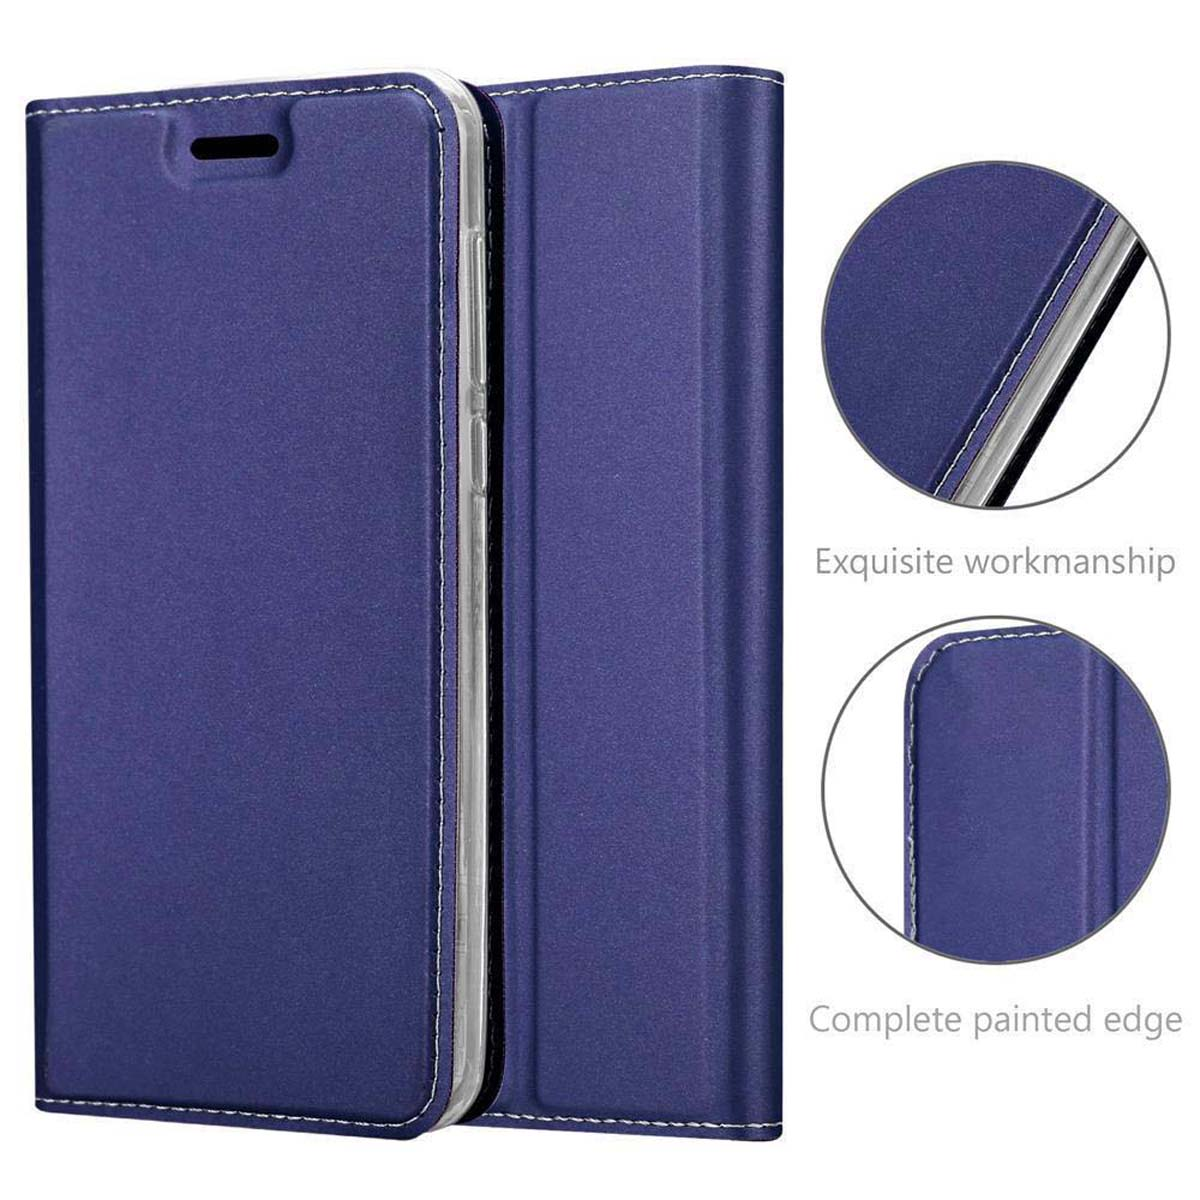 CADORABO Handyhülle Classy Book Style, Huawei, CLASSY Bookcover, DUNKEL P8, BLAU